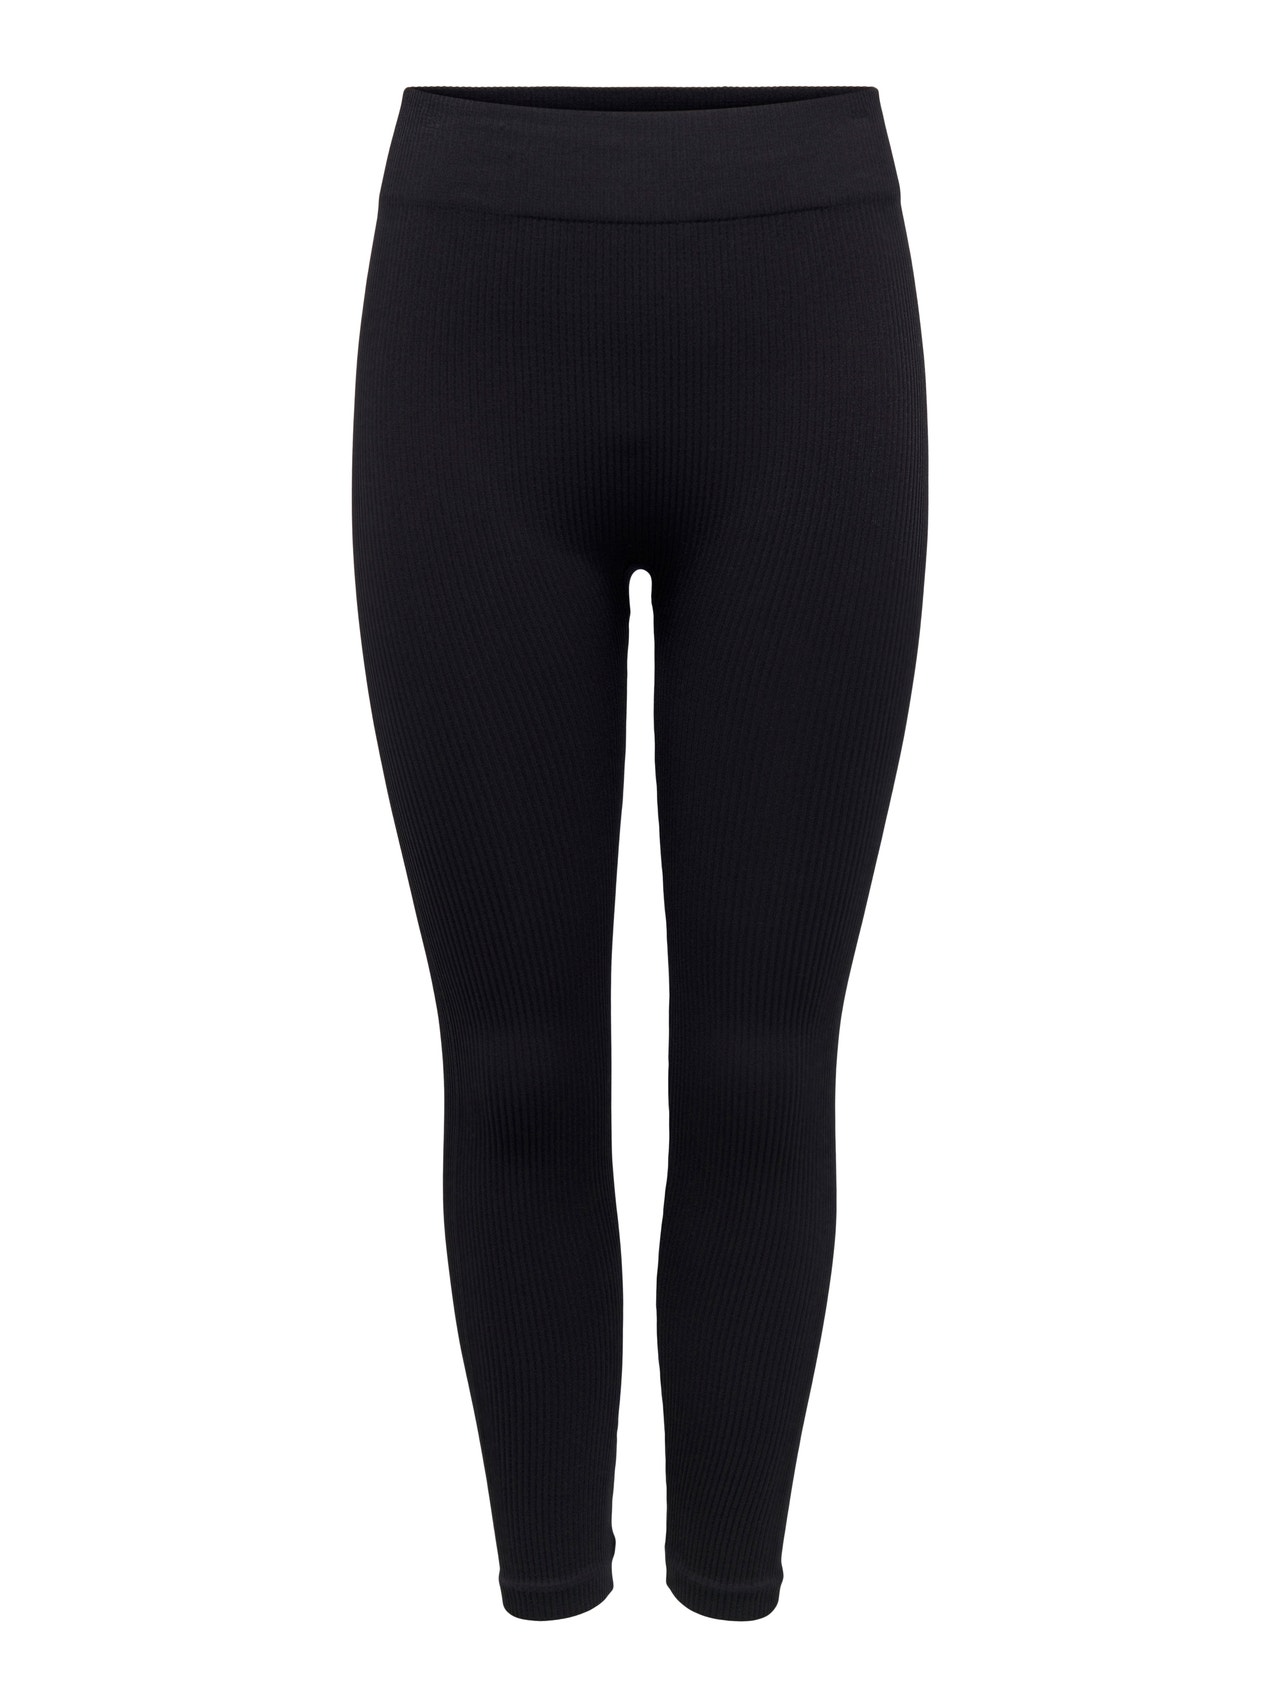 ONLY Tight Fit High waist Curve Leggings -Black - 15289048